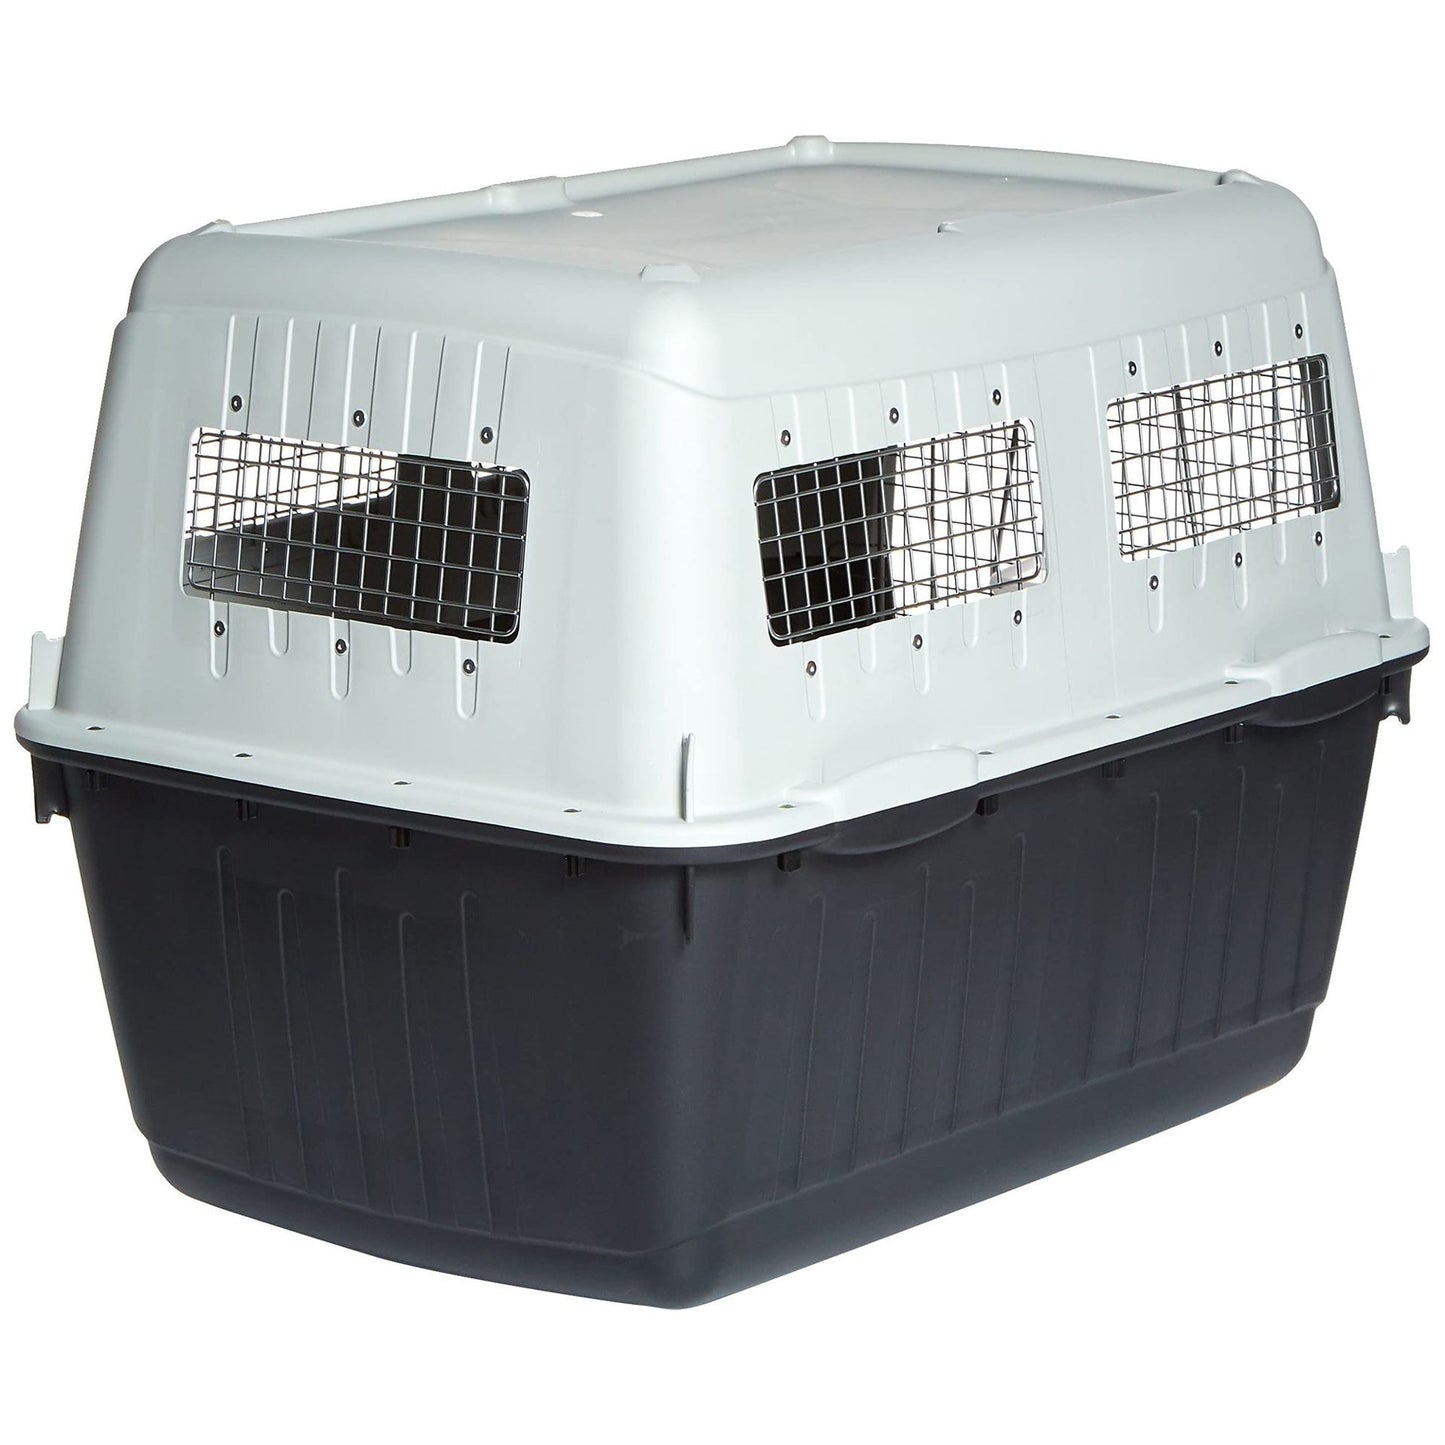 Mp Bergamo Dog Carrier, 102 x 73 x 77cm, Grey and Black - COOLBABY